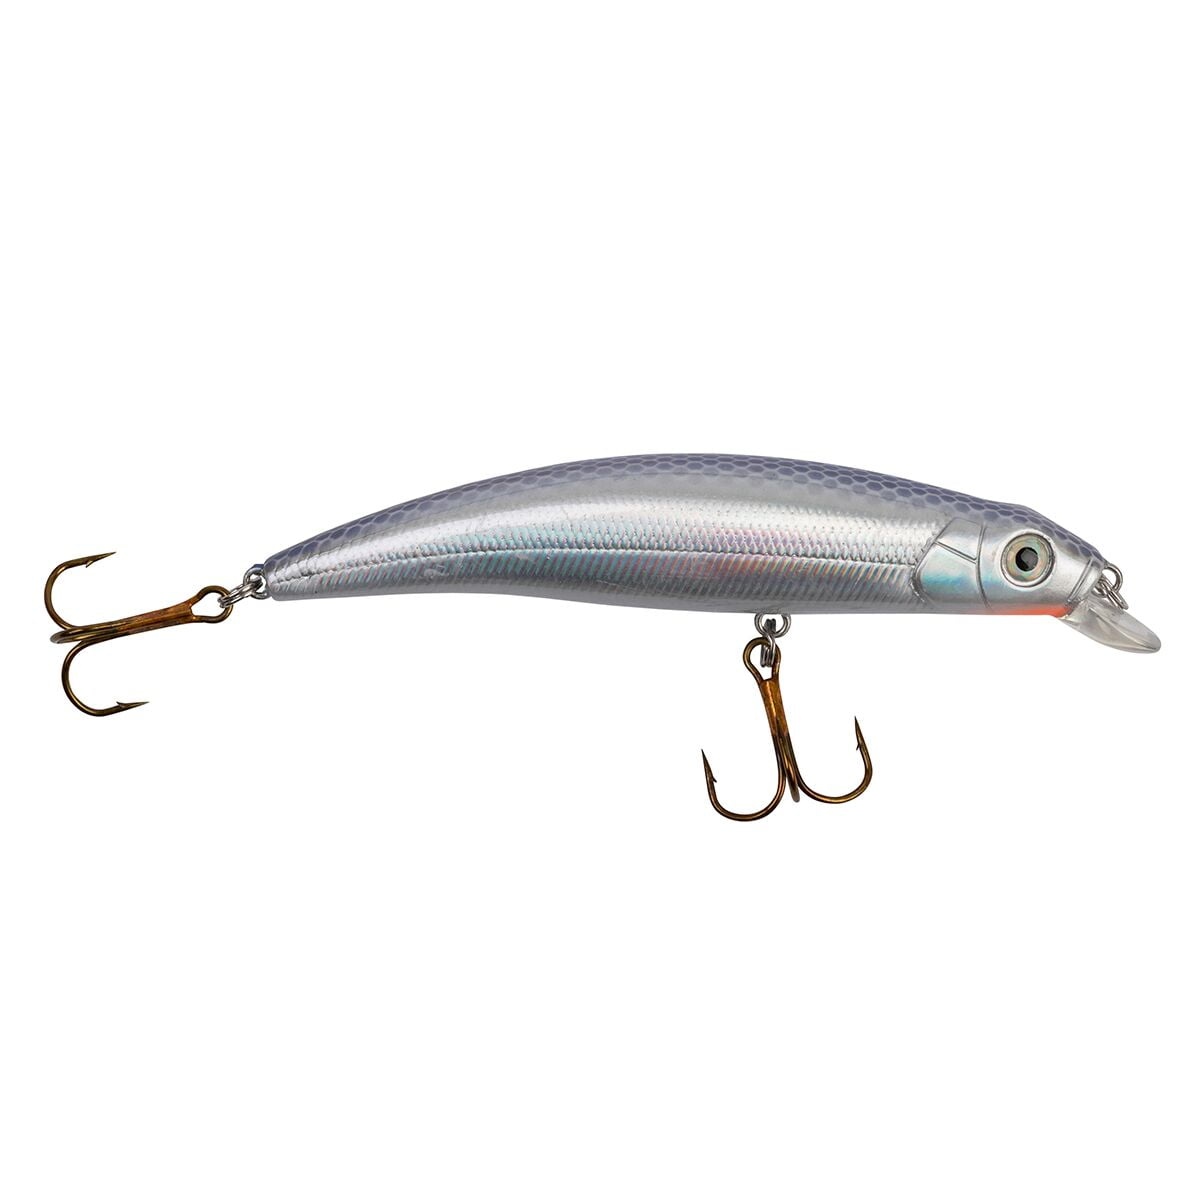 Fishing Lures Rock Floating Minnow Wobbler Hard Bait Area Trout Perch Rockfish